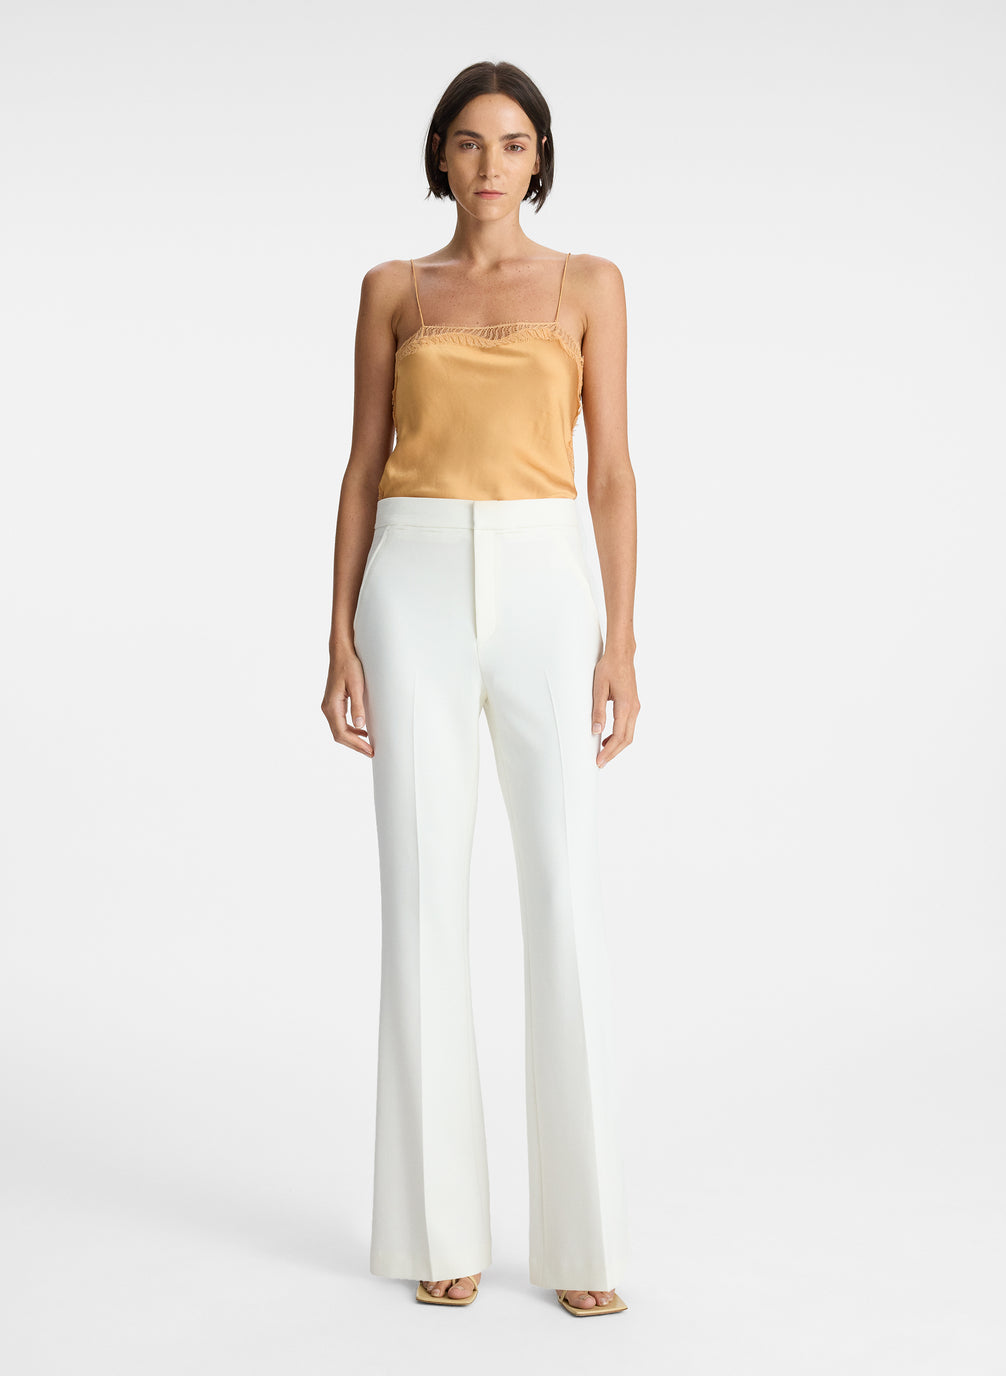 front view of woman wearing beige camisole and white pants